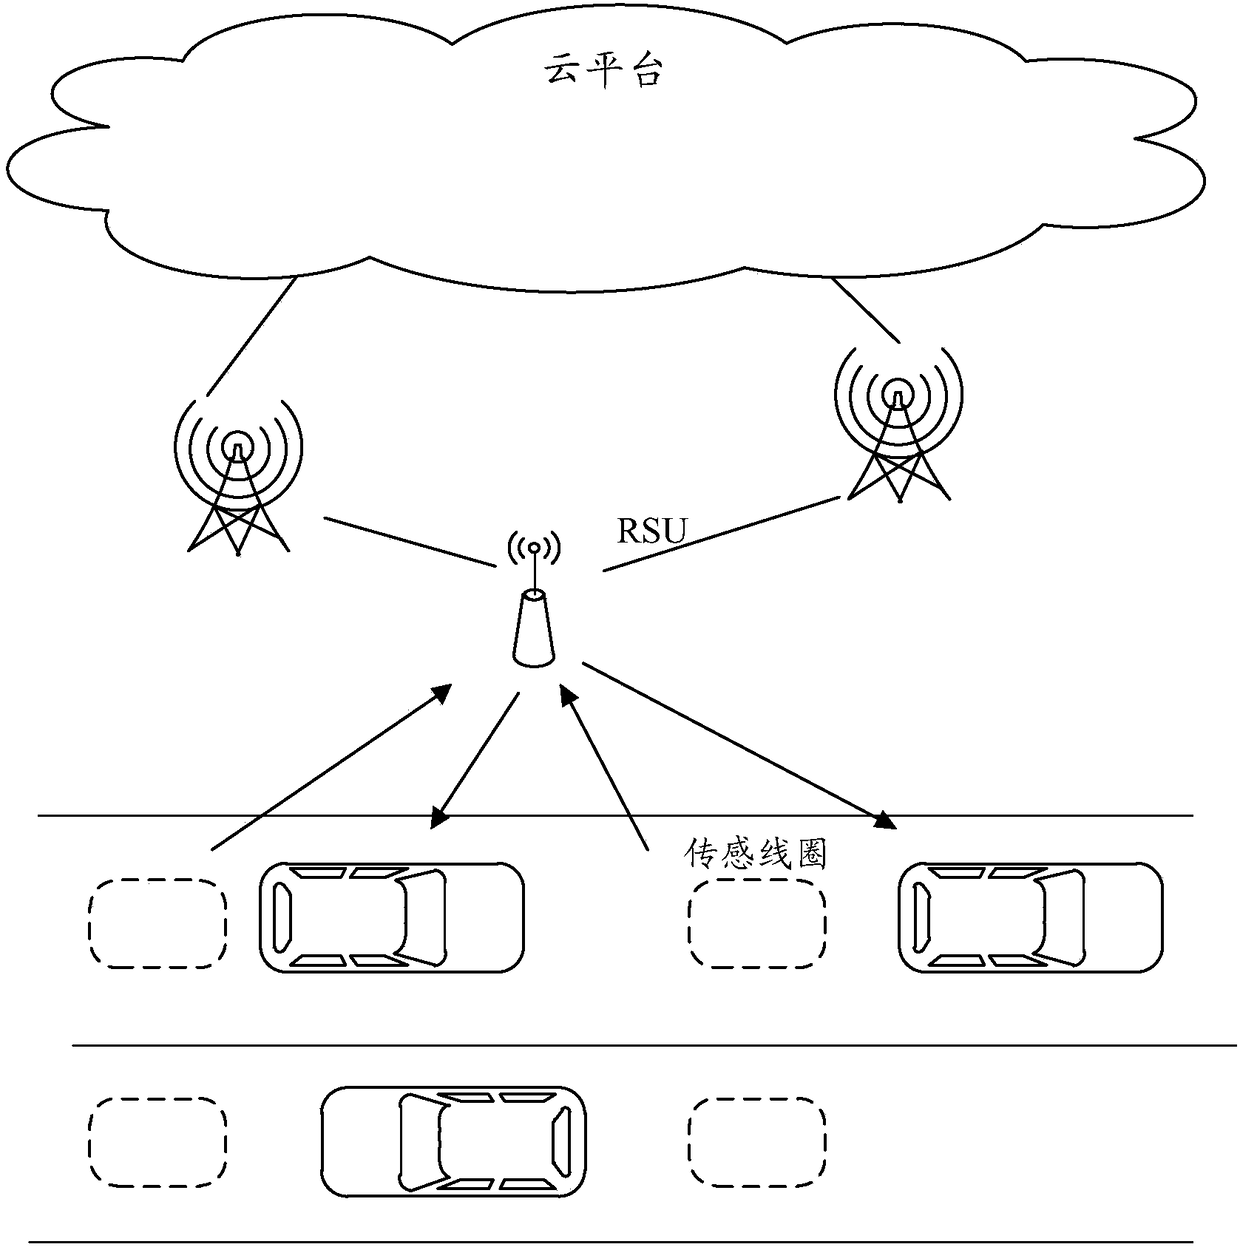 Traffic event identification method and device